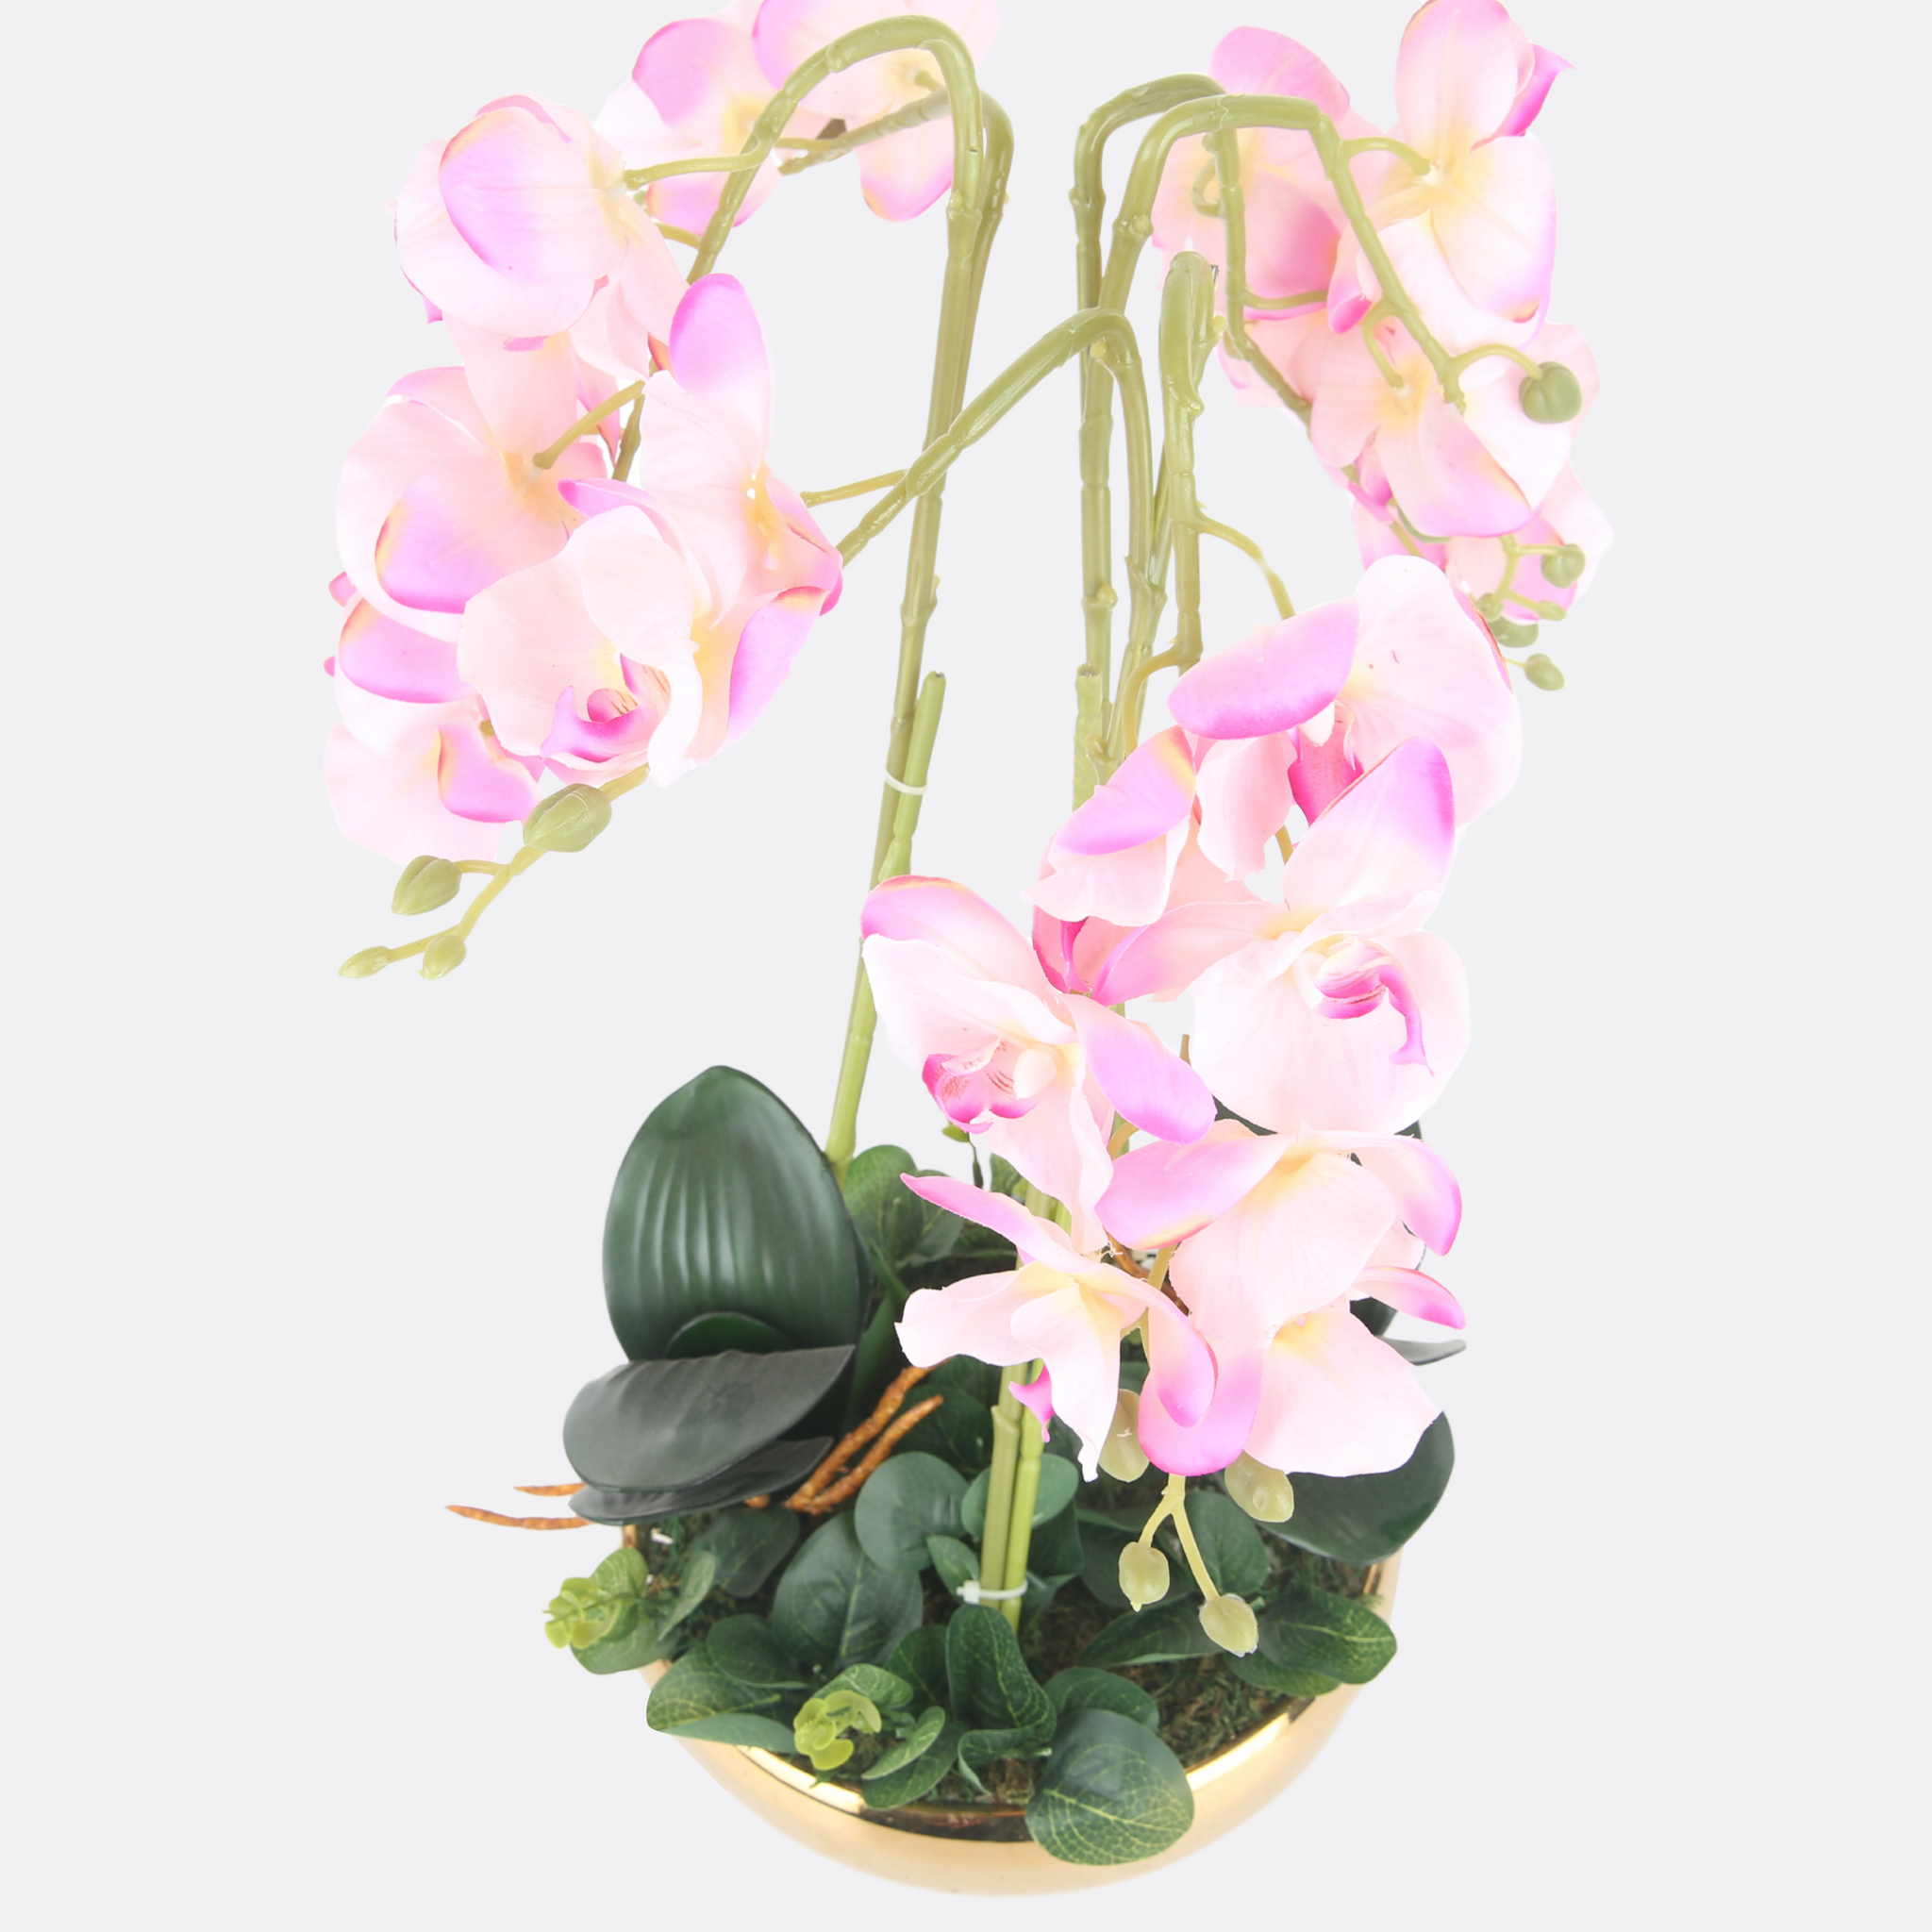 Thai Pink Orchard Plant In Ceramic Bowl